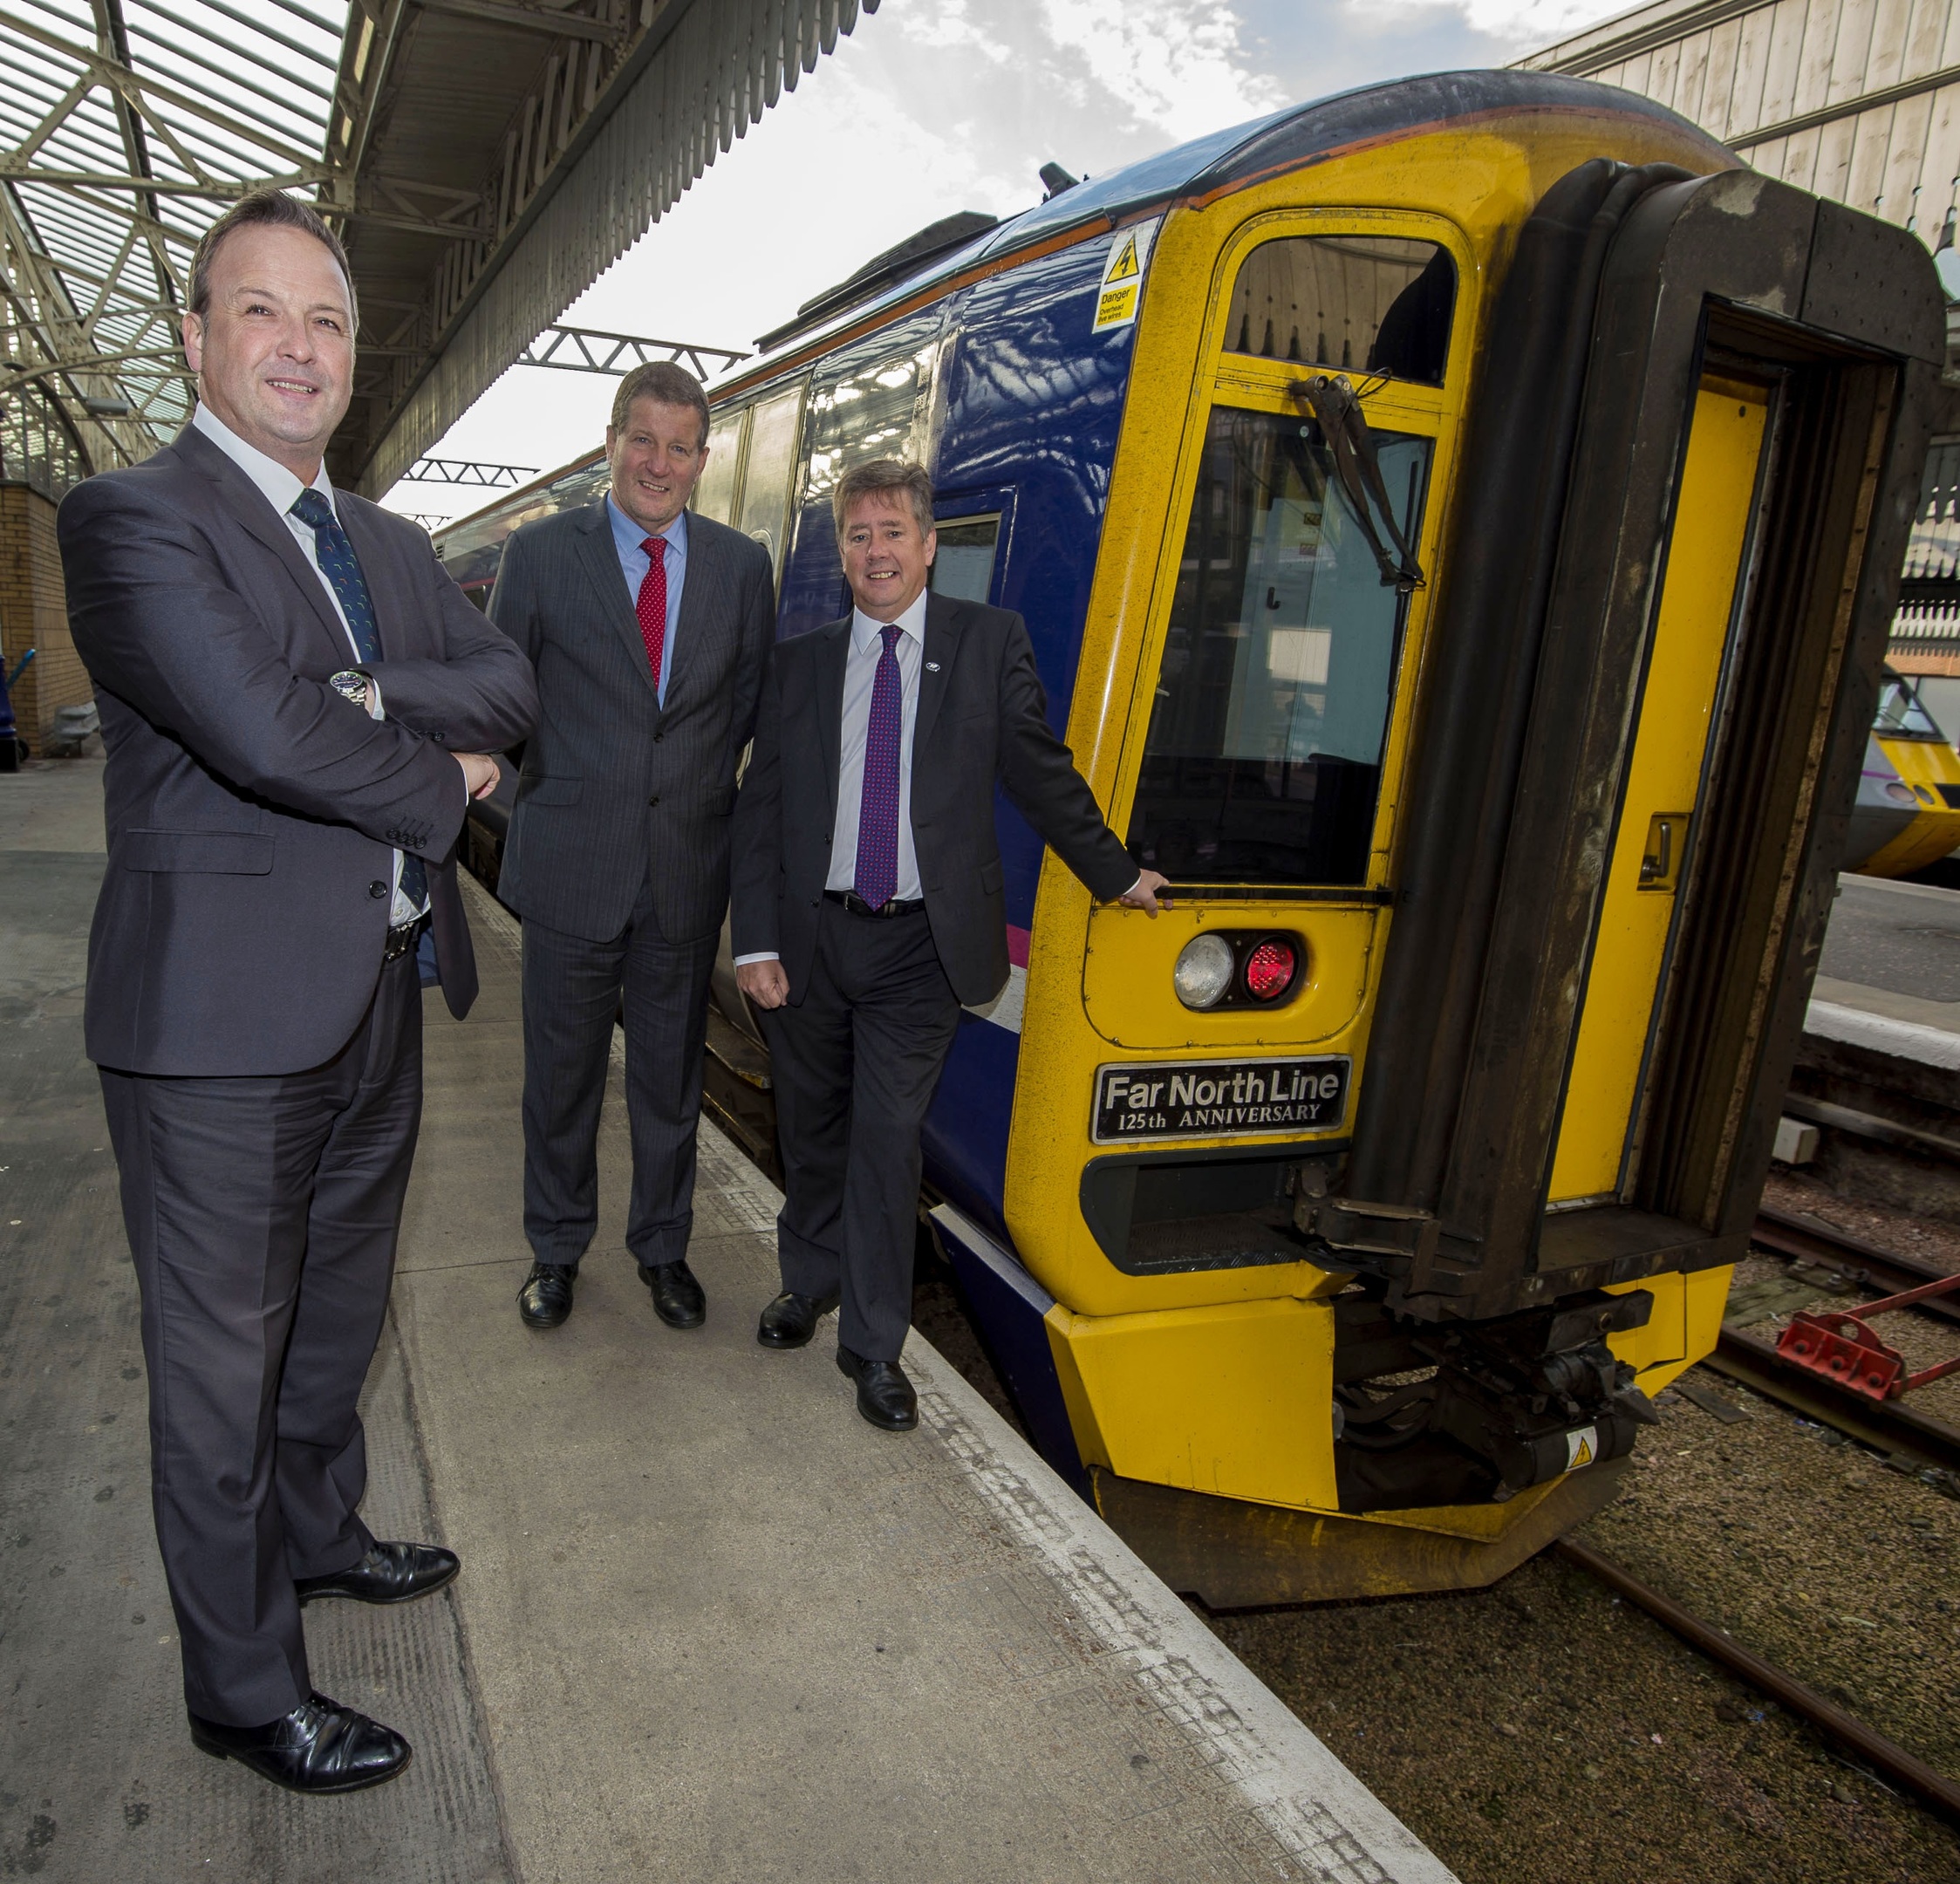 Infrastructure secretary Keith Brown MSP announces BAM as principal contractor for the £170m upgrade of the Aberdeen-Inverness line.